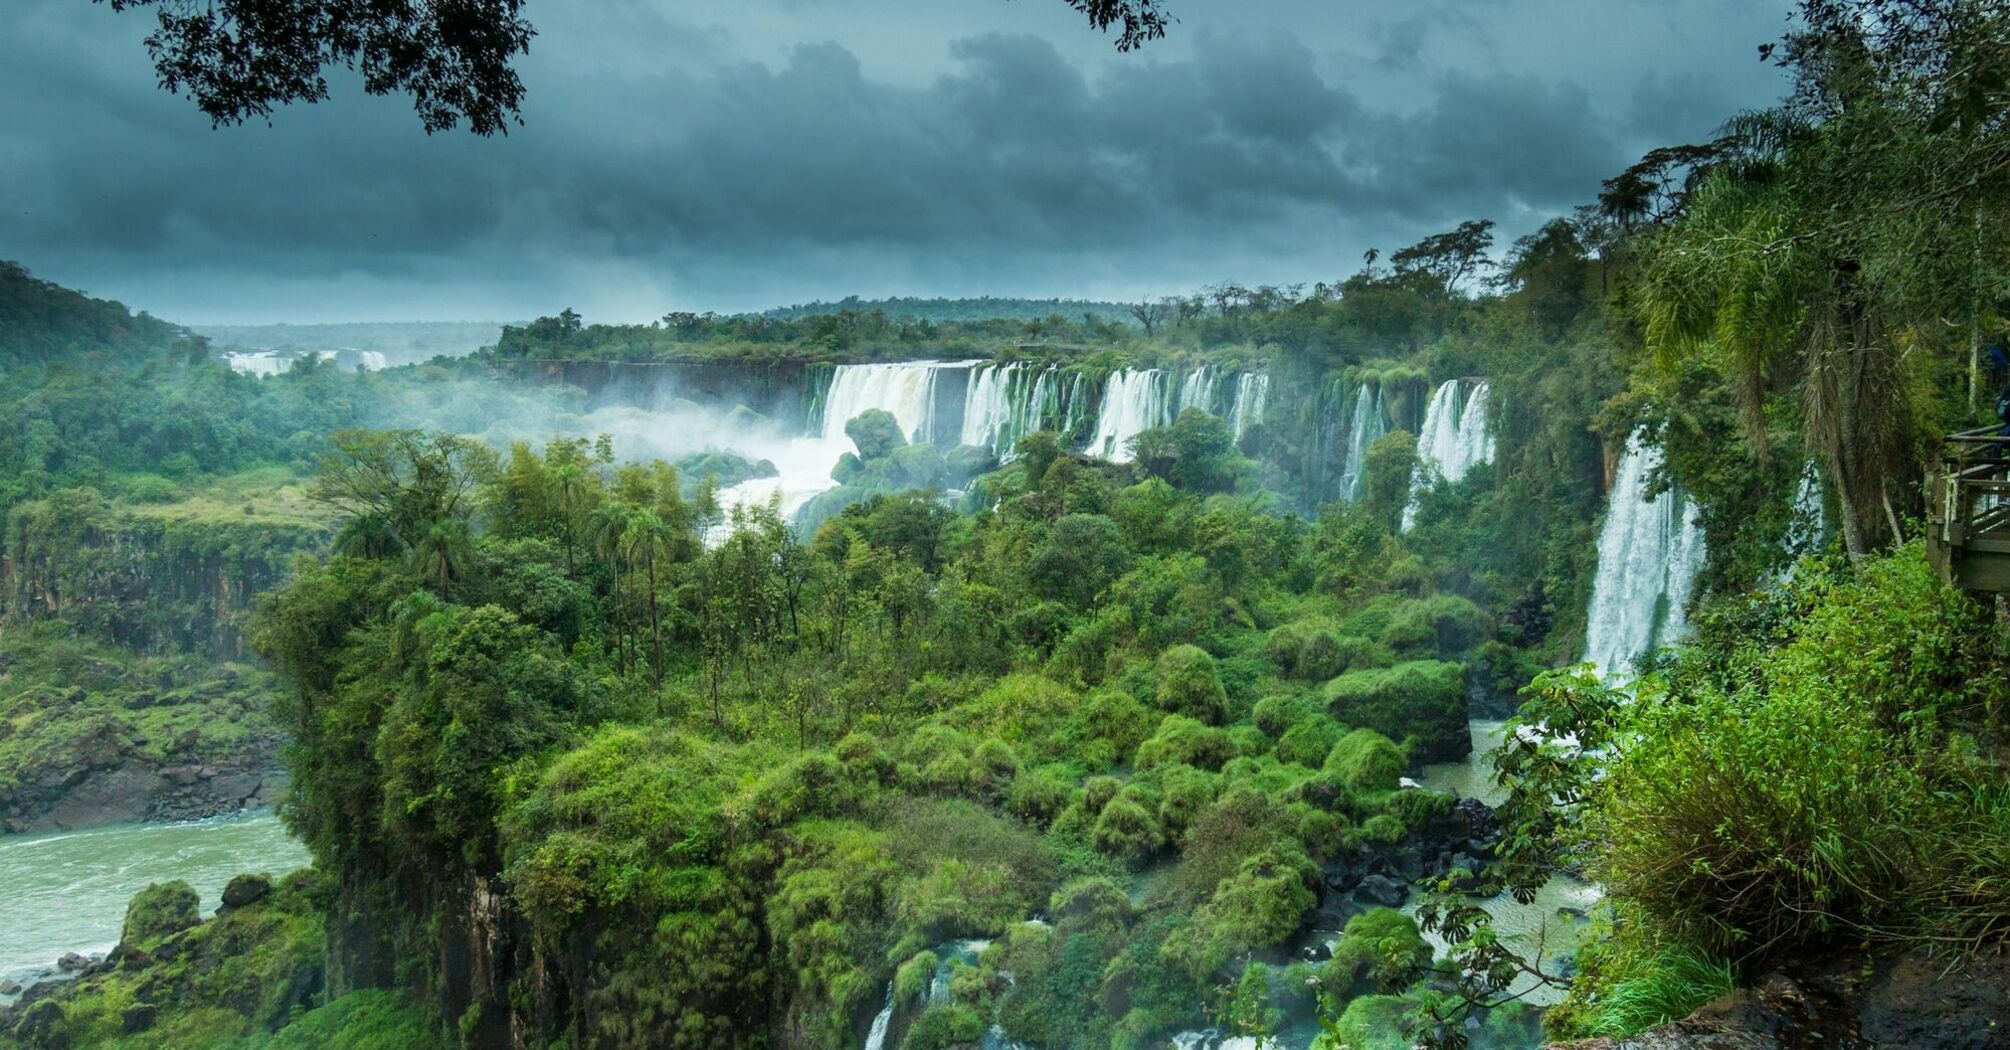 Rainy and cloudy view of Iguazú Falls